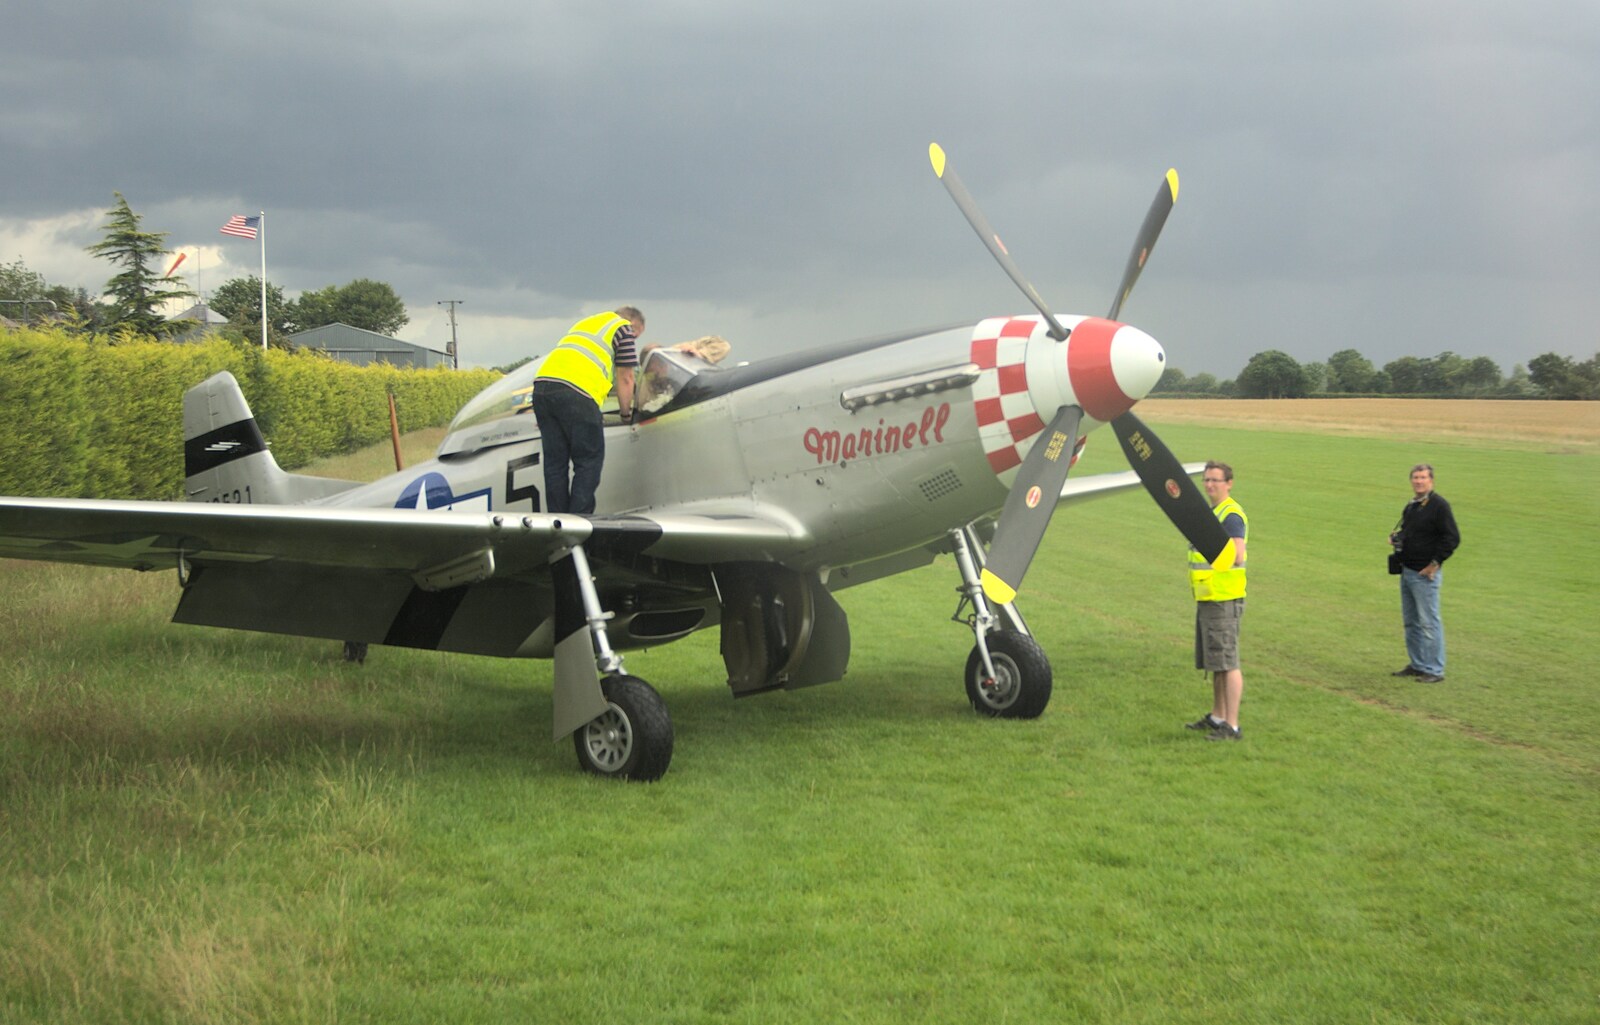 Meanwhile, Marinell loads up from Nosher Flies in a P-51D Mustang, Hardwick Airfield, Norfolk (and the Whole of Suffolk) - 17th July 2011